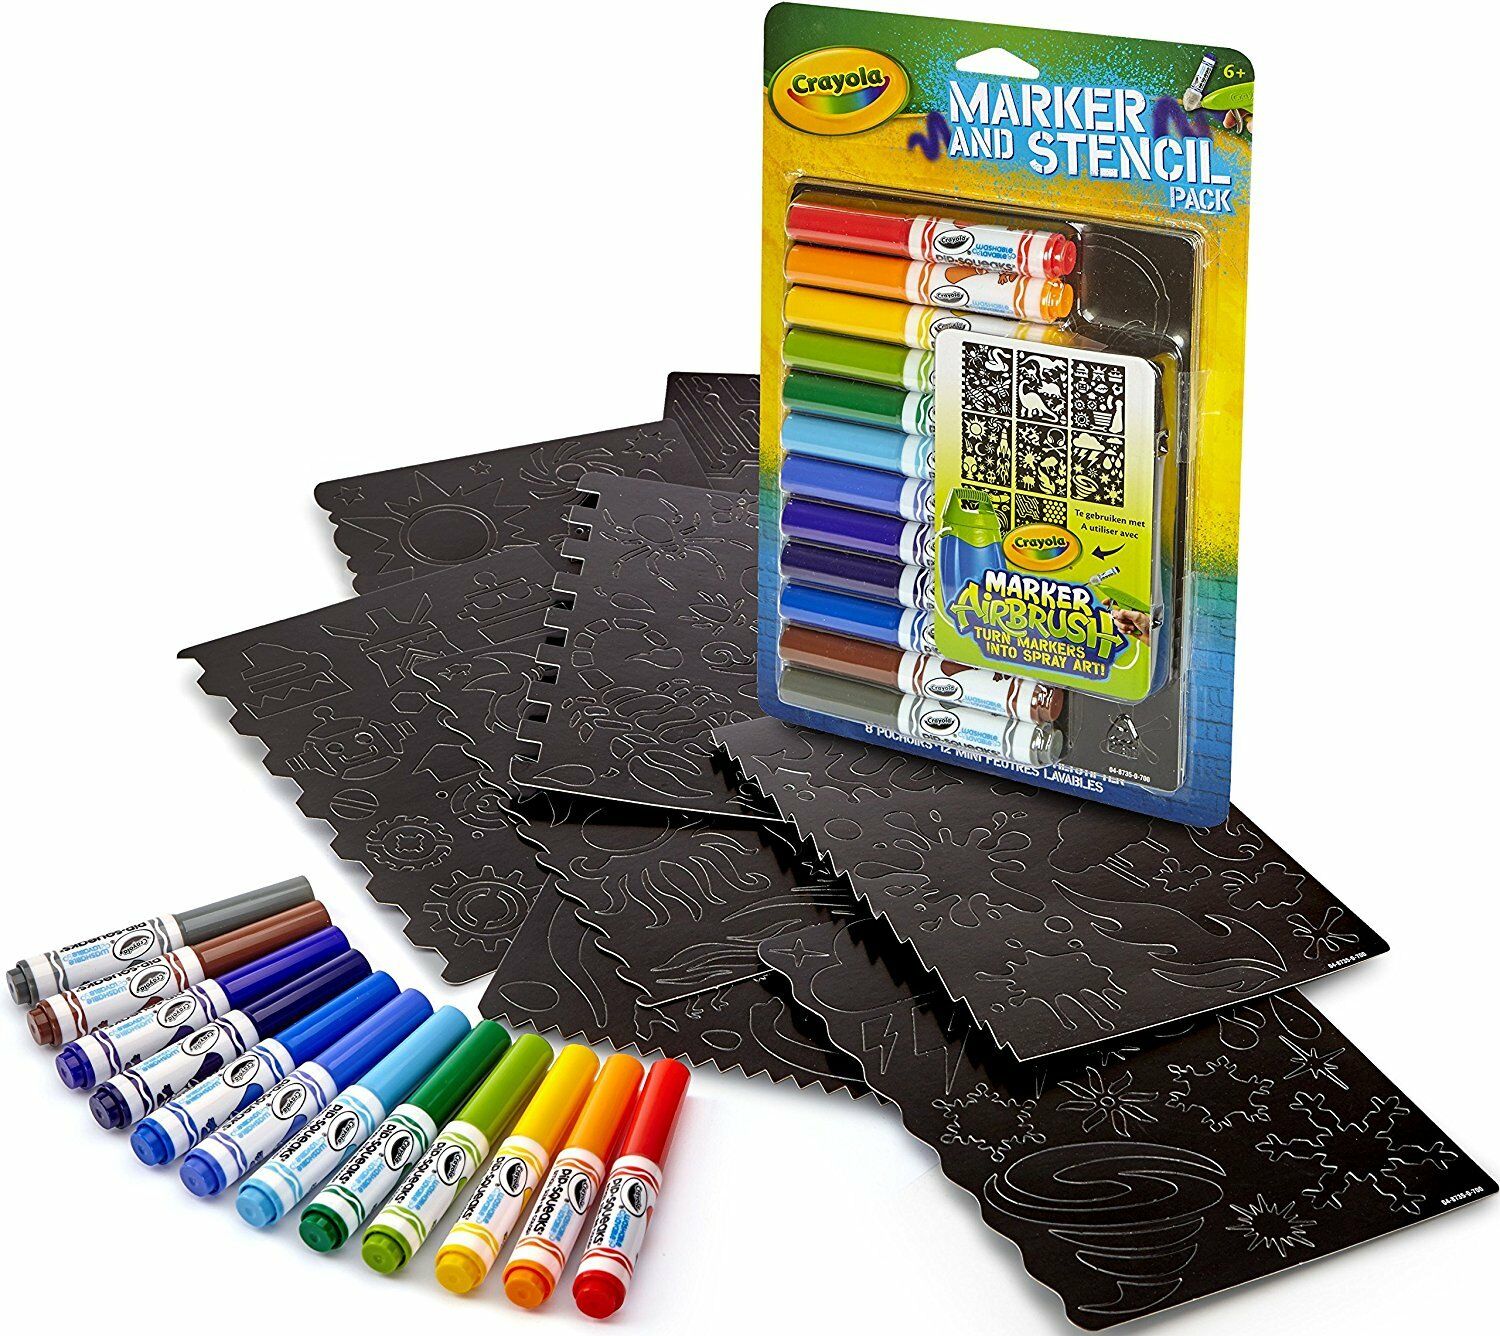 Crayola Airbrush Marker And Stencil Pack 04-8735 ~~free Shipping~~ Kids Toy Gift